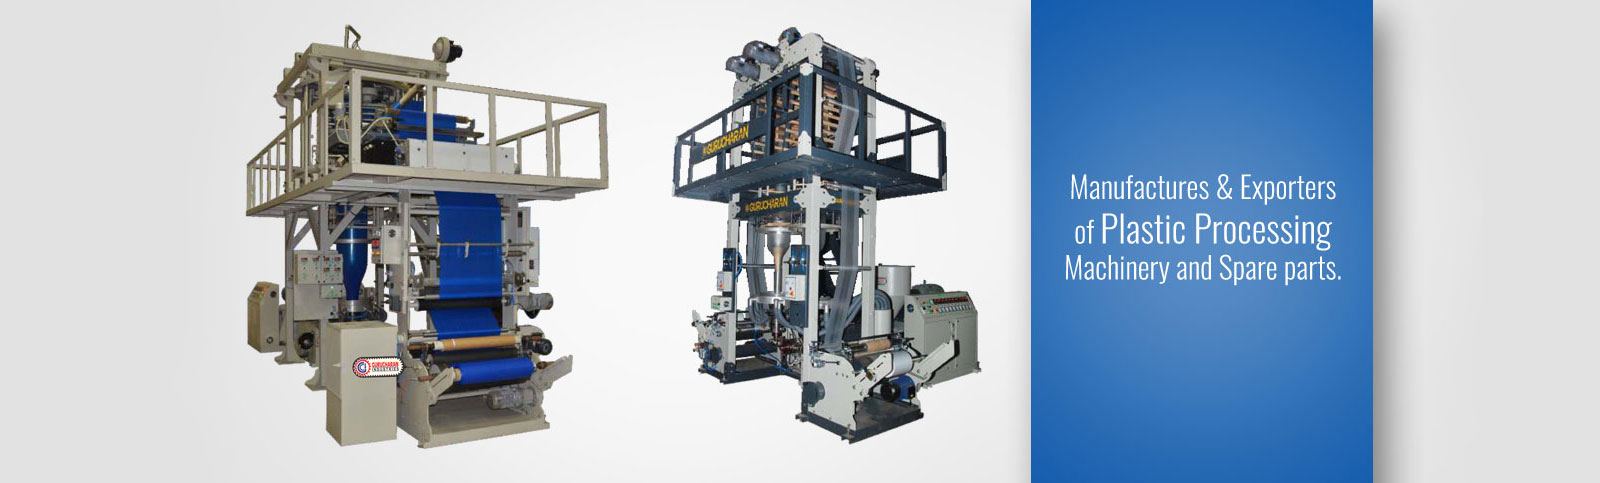 Plastic Processing Machines Manufacturers, Plastic Processing Machinery Manufacturers , Blown Film Excluders Manufacturers, Blown Film Plant Manufacturers, HDPE, LDPE, LDPP, Plastic Processing Machinery Manufacturers  Exporters in India for Quality Product Manufacturers